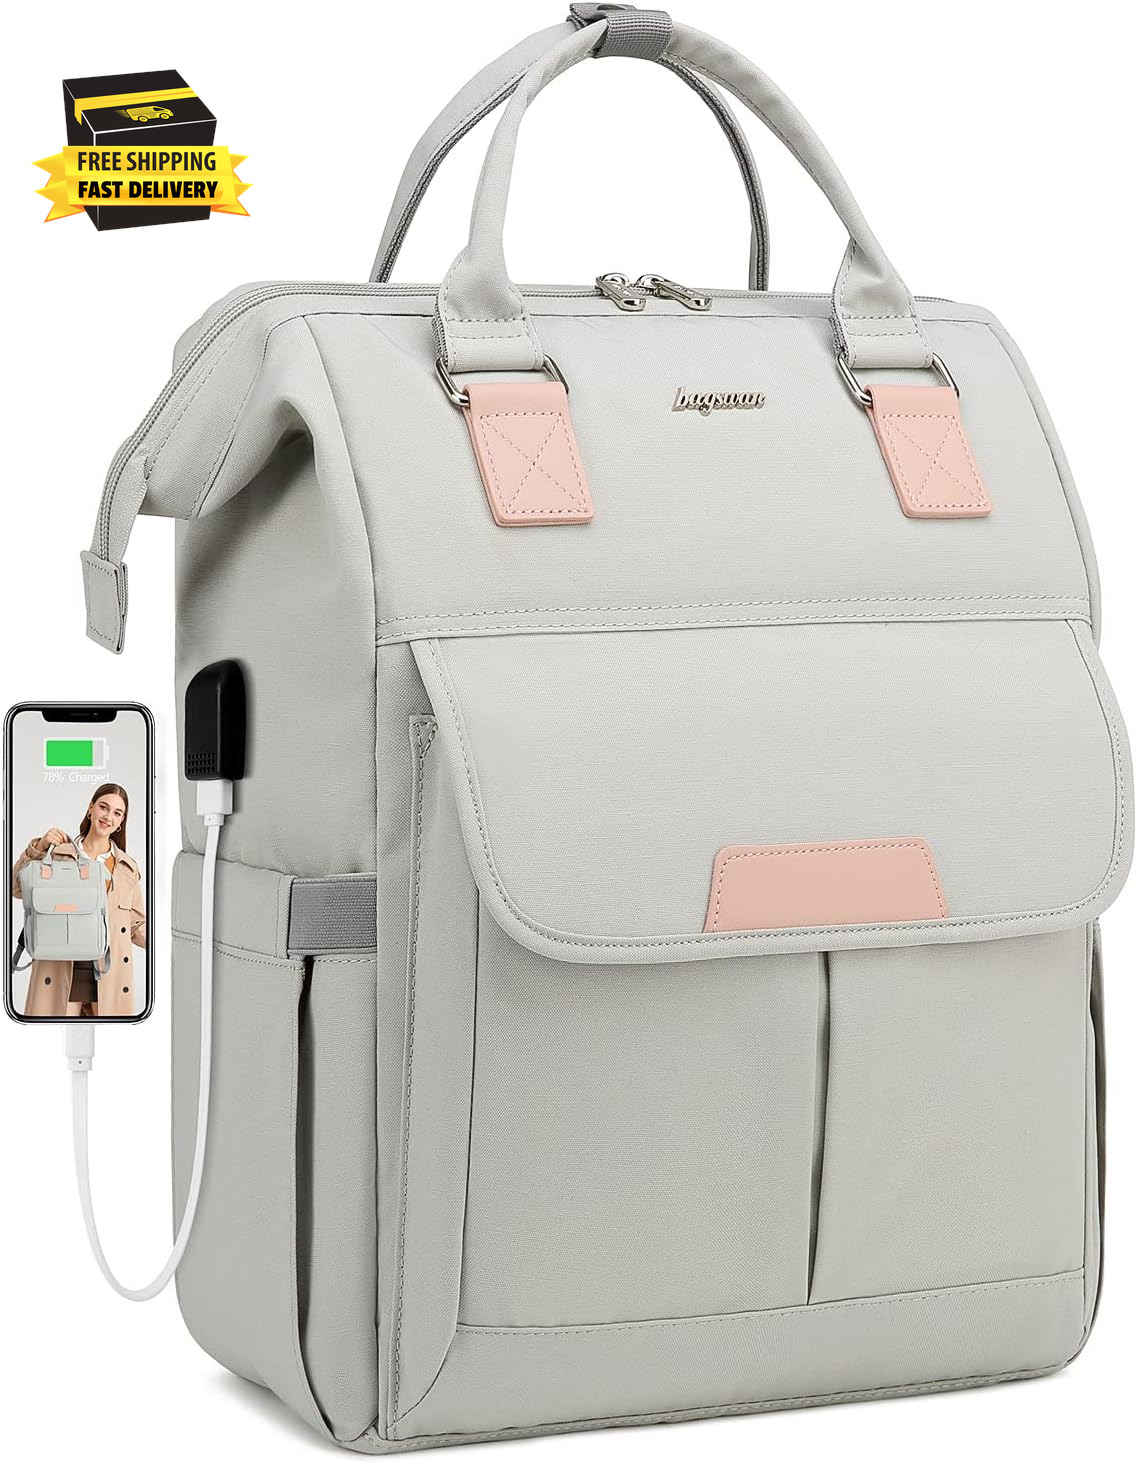 15.6 Inch Laptop Backpack for Women with USB Charger - for College, High School,